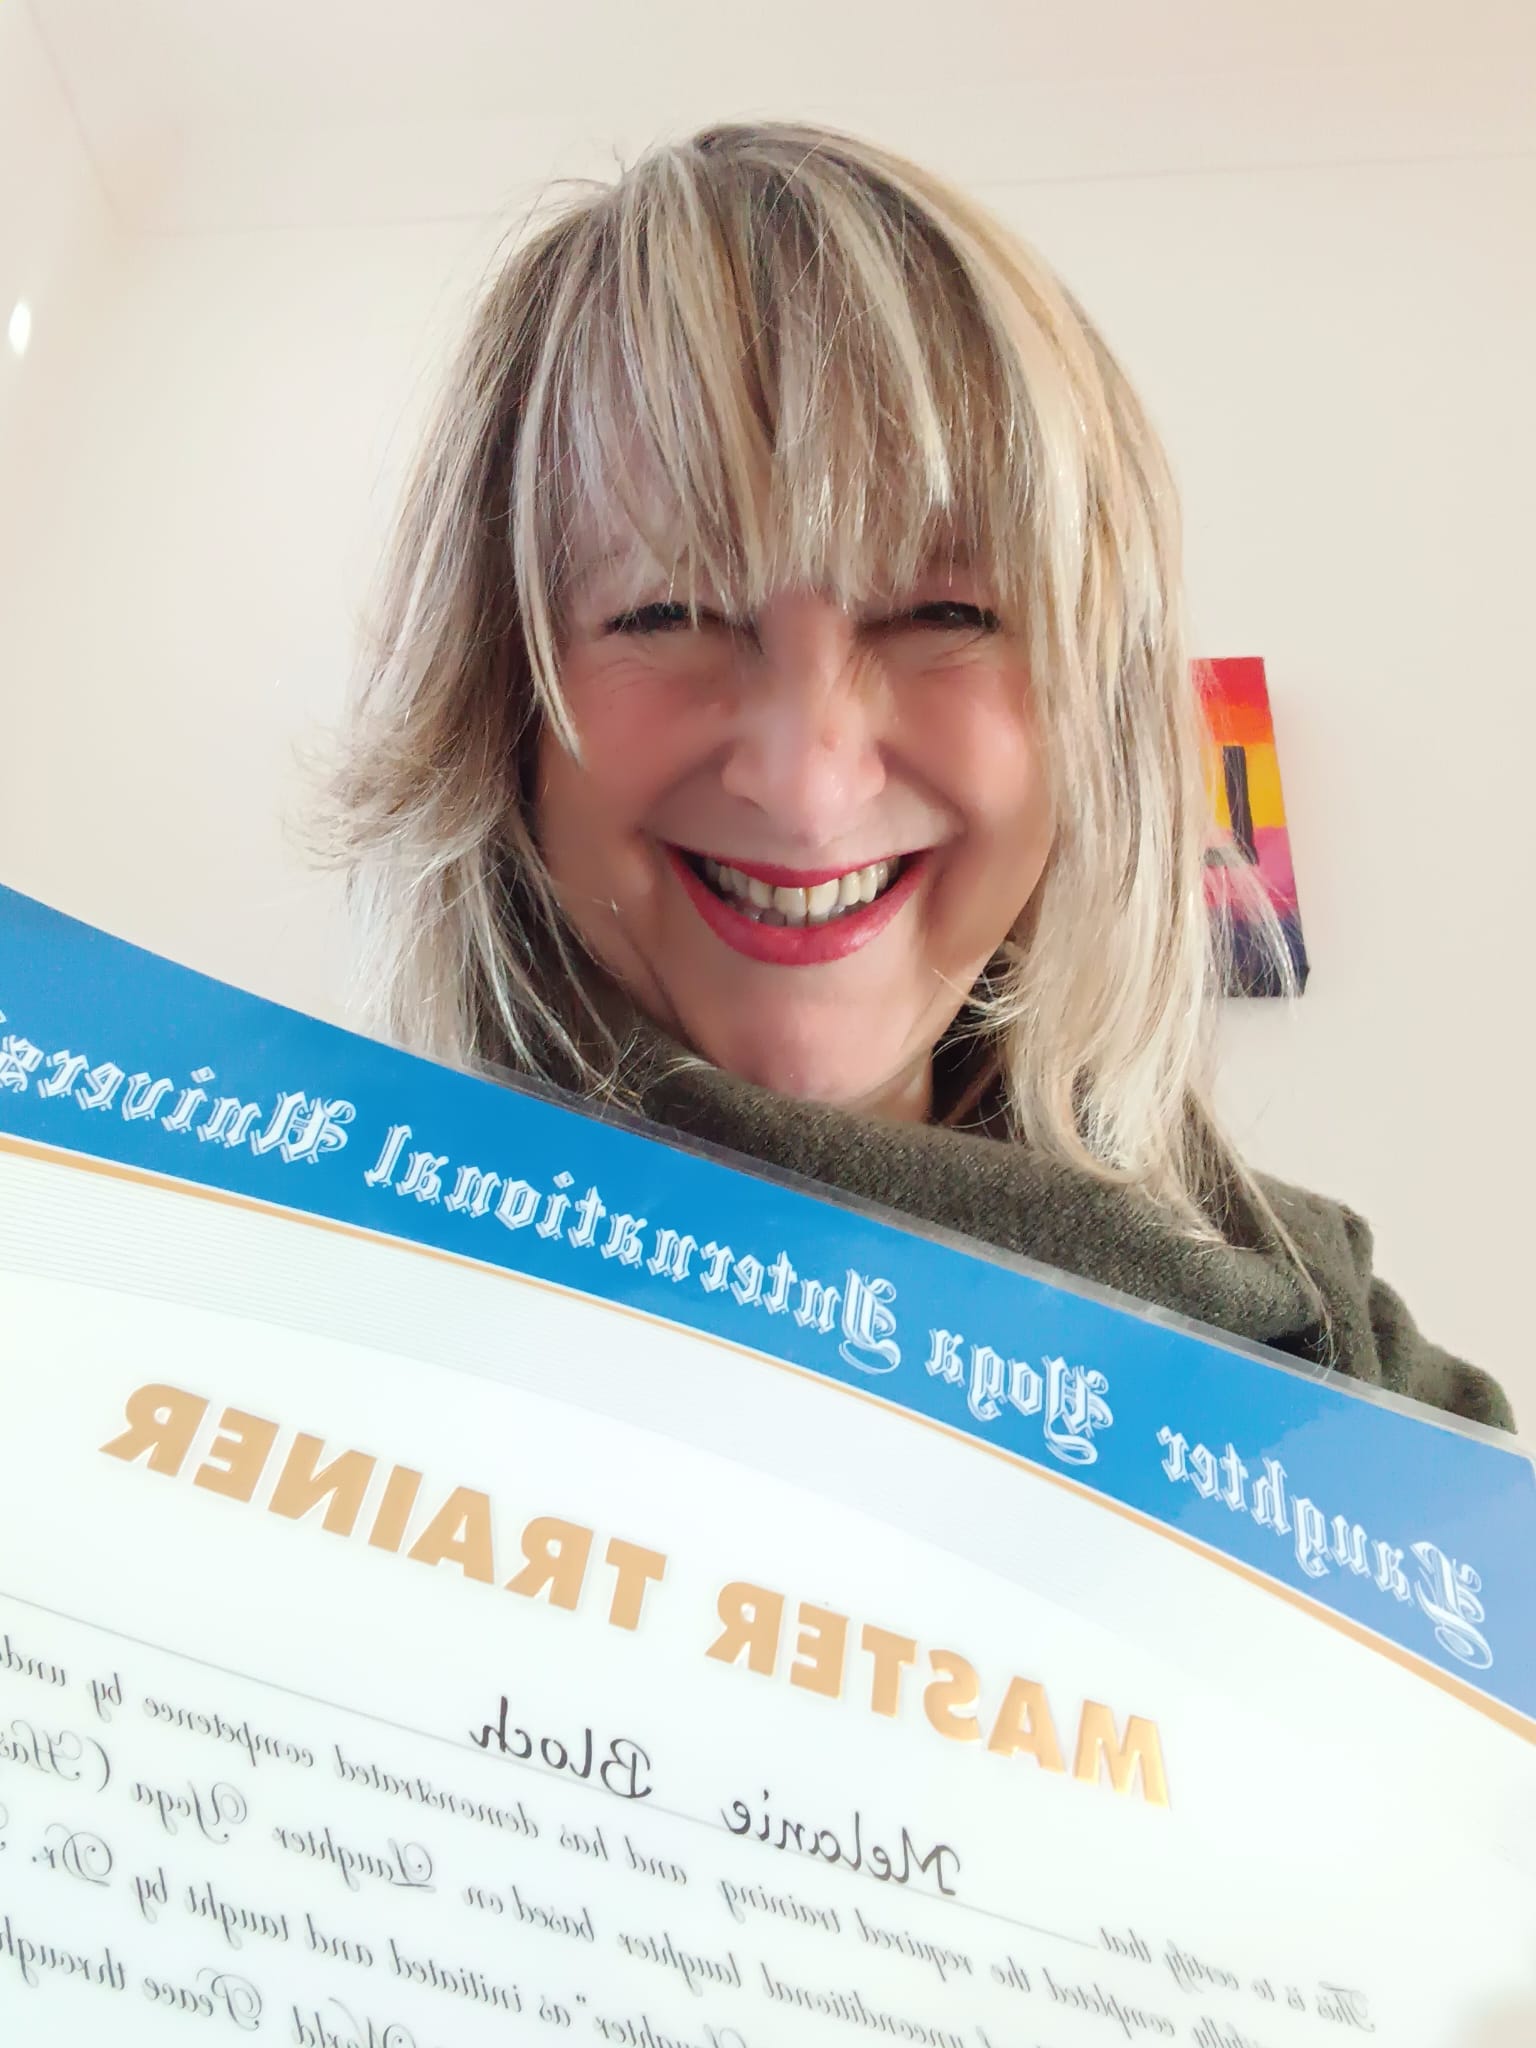 master mel bloch - Corporate Laughter Yoga Training & Workshop Specialists in the UK | Corporate Wellness & Workplace Wellbeing Programmes, Trainings & Workshops in London UK with Laughter Yoga Expert Lotte Mikkelsen